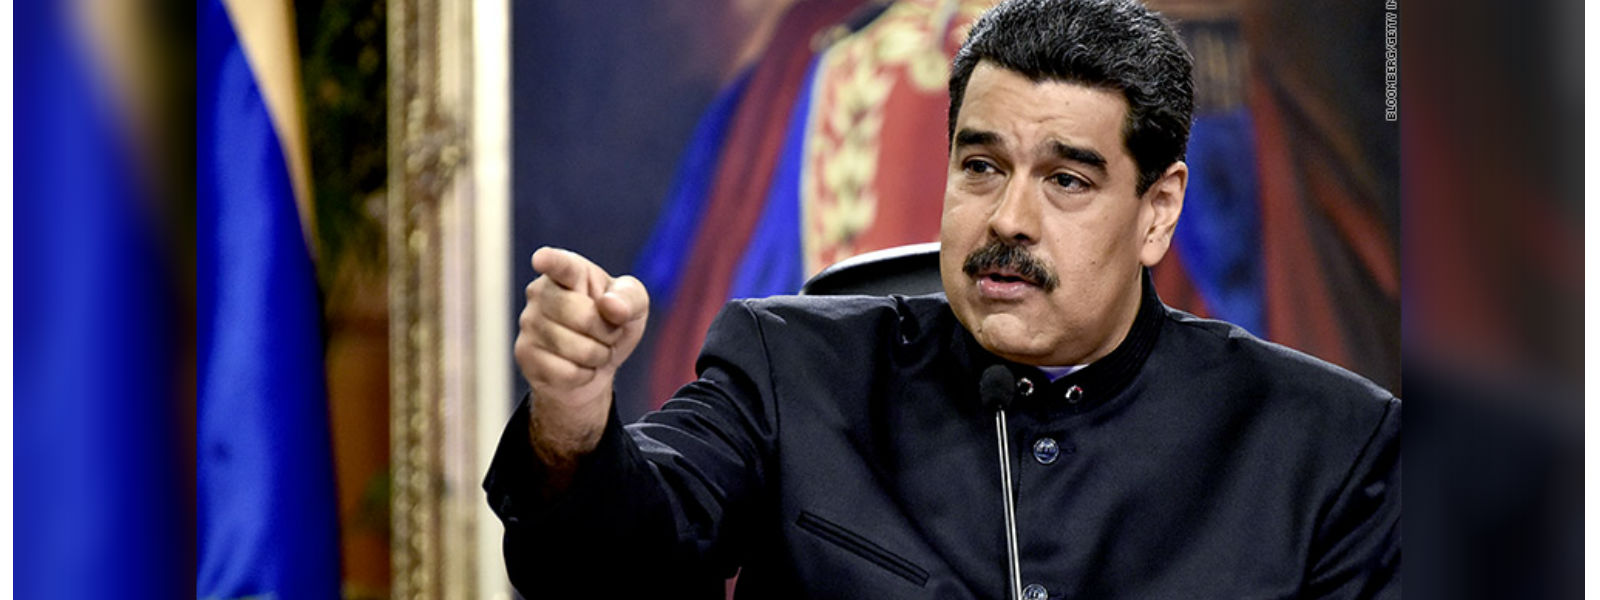 Maduro says that FIFA victory was a win for Africa